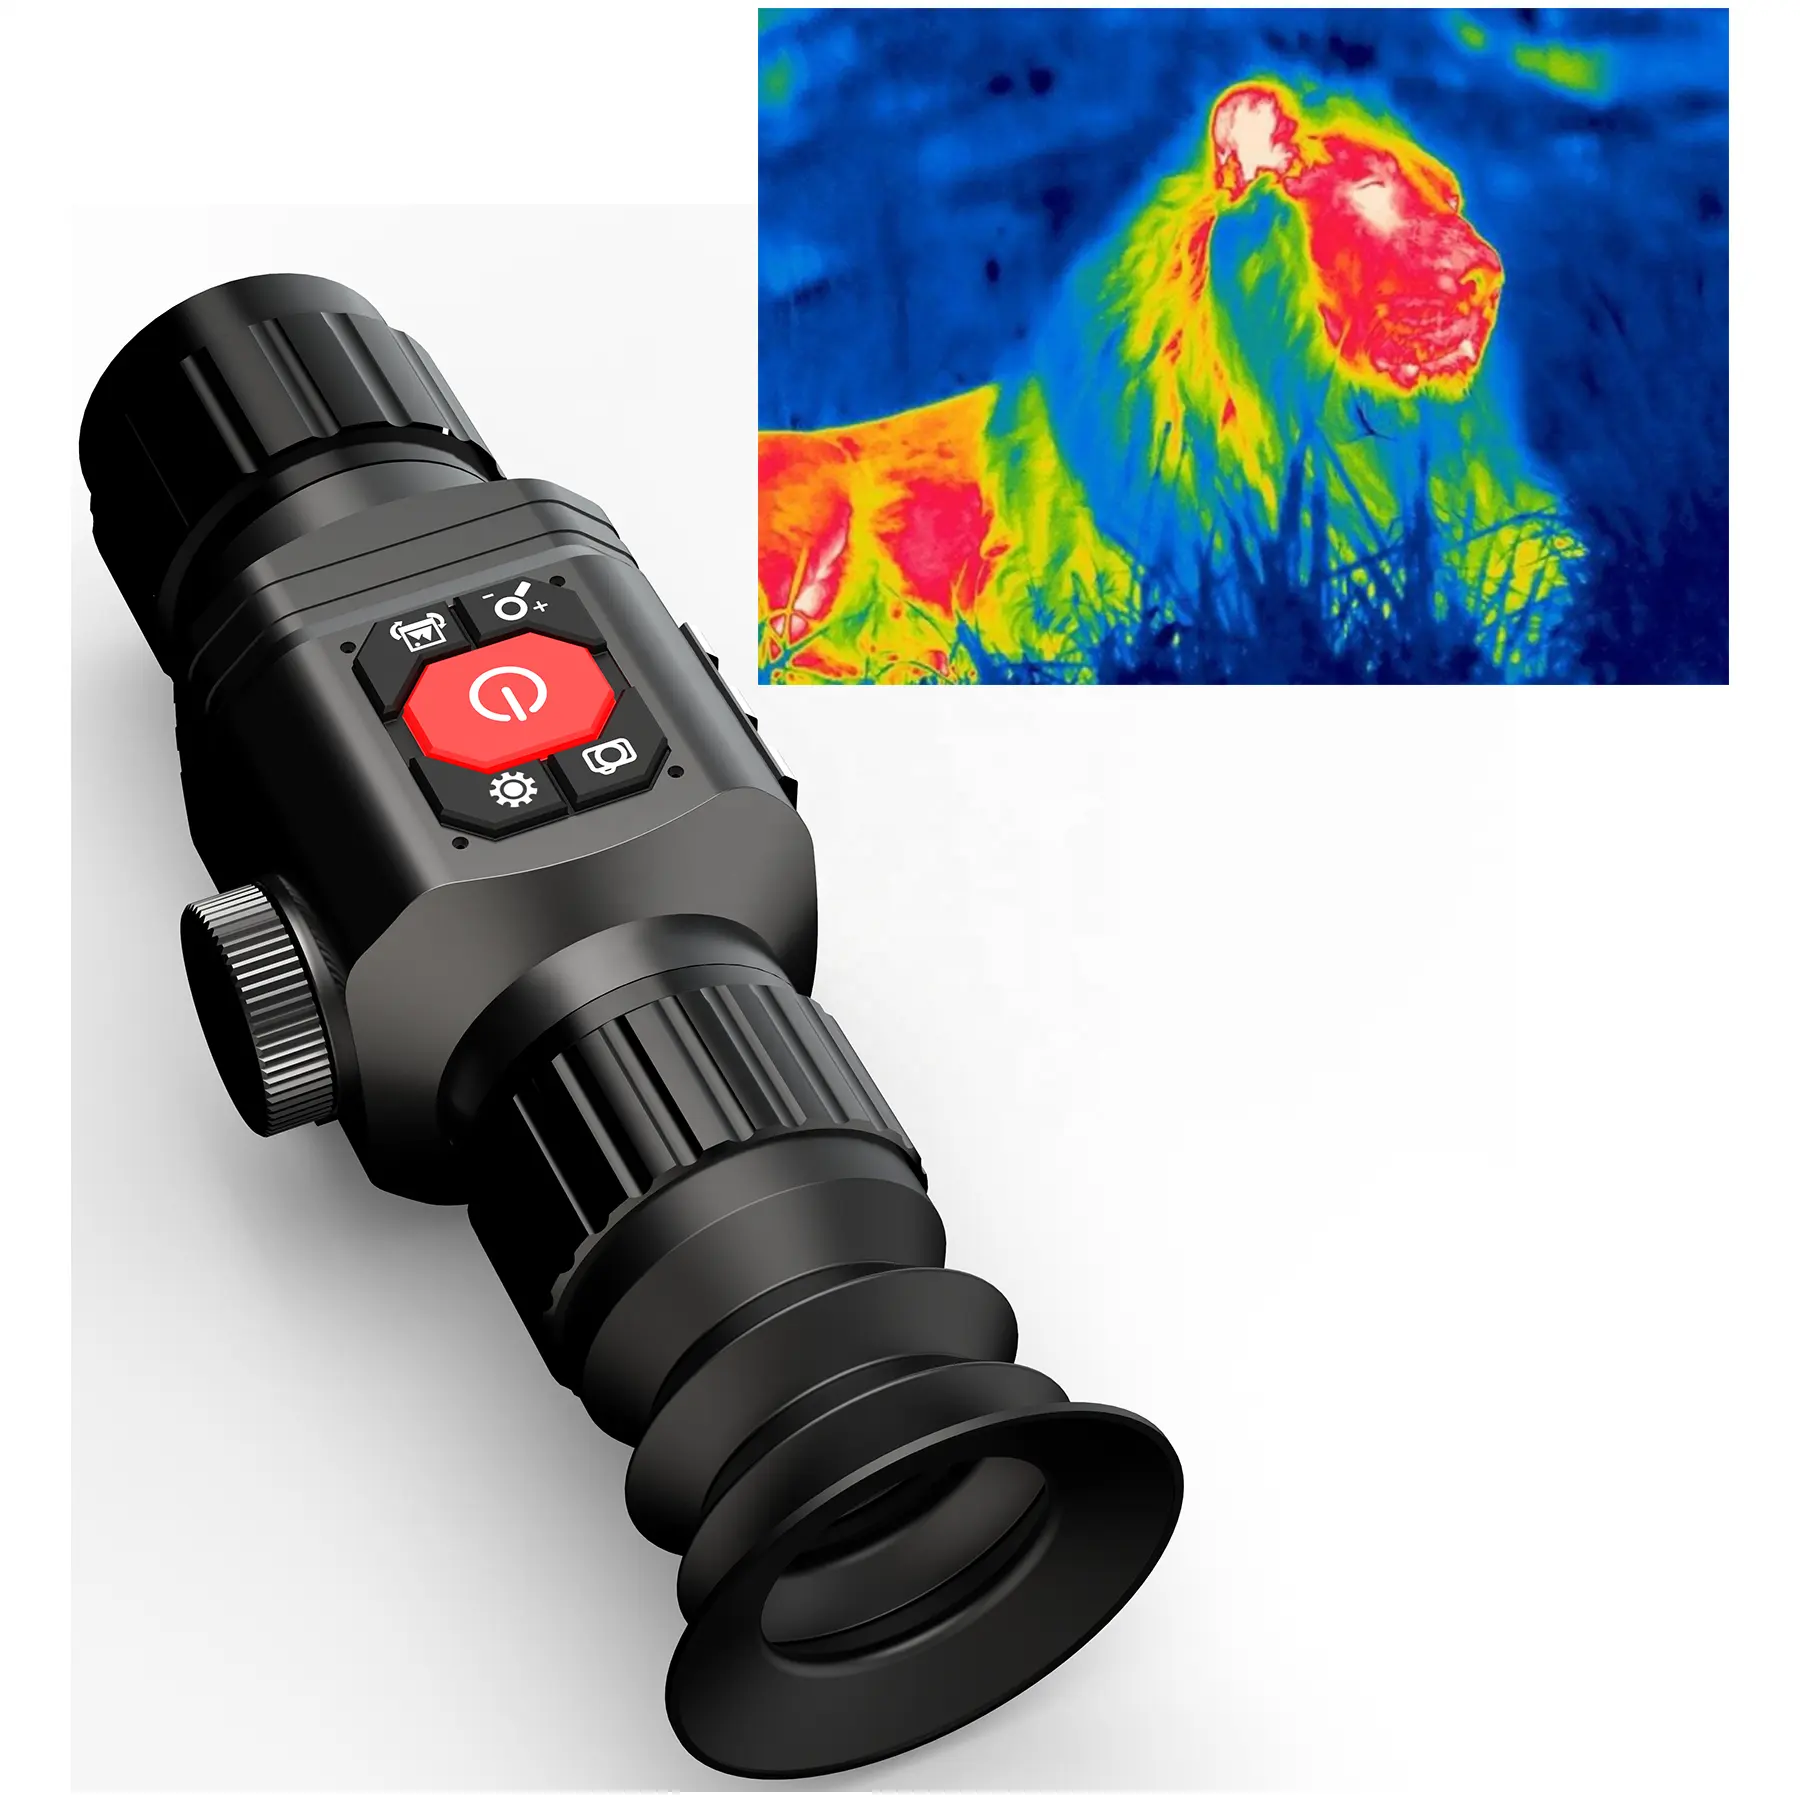 Waterproof outdoor Hunting Thermal Imaging telescope Sight Long Distance Look Night Vision infrared Monocular Thermal Scope